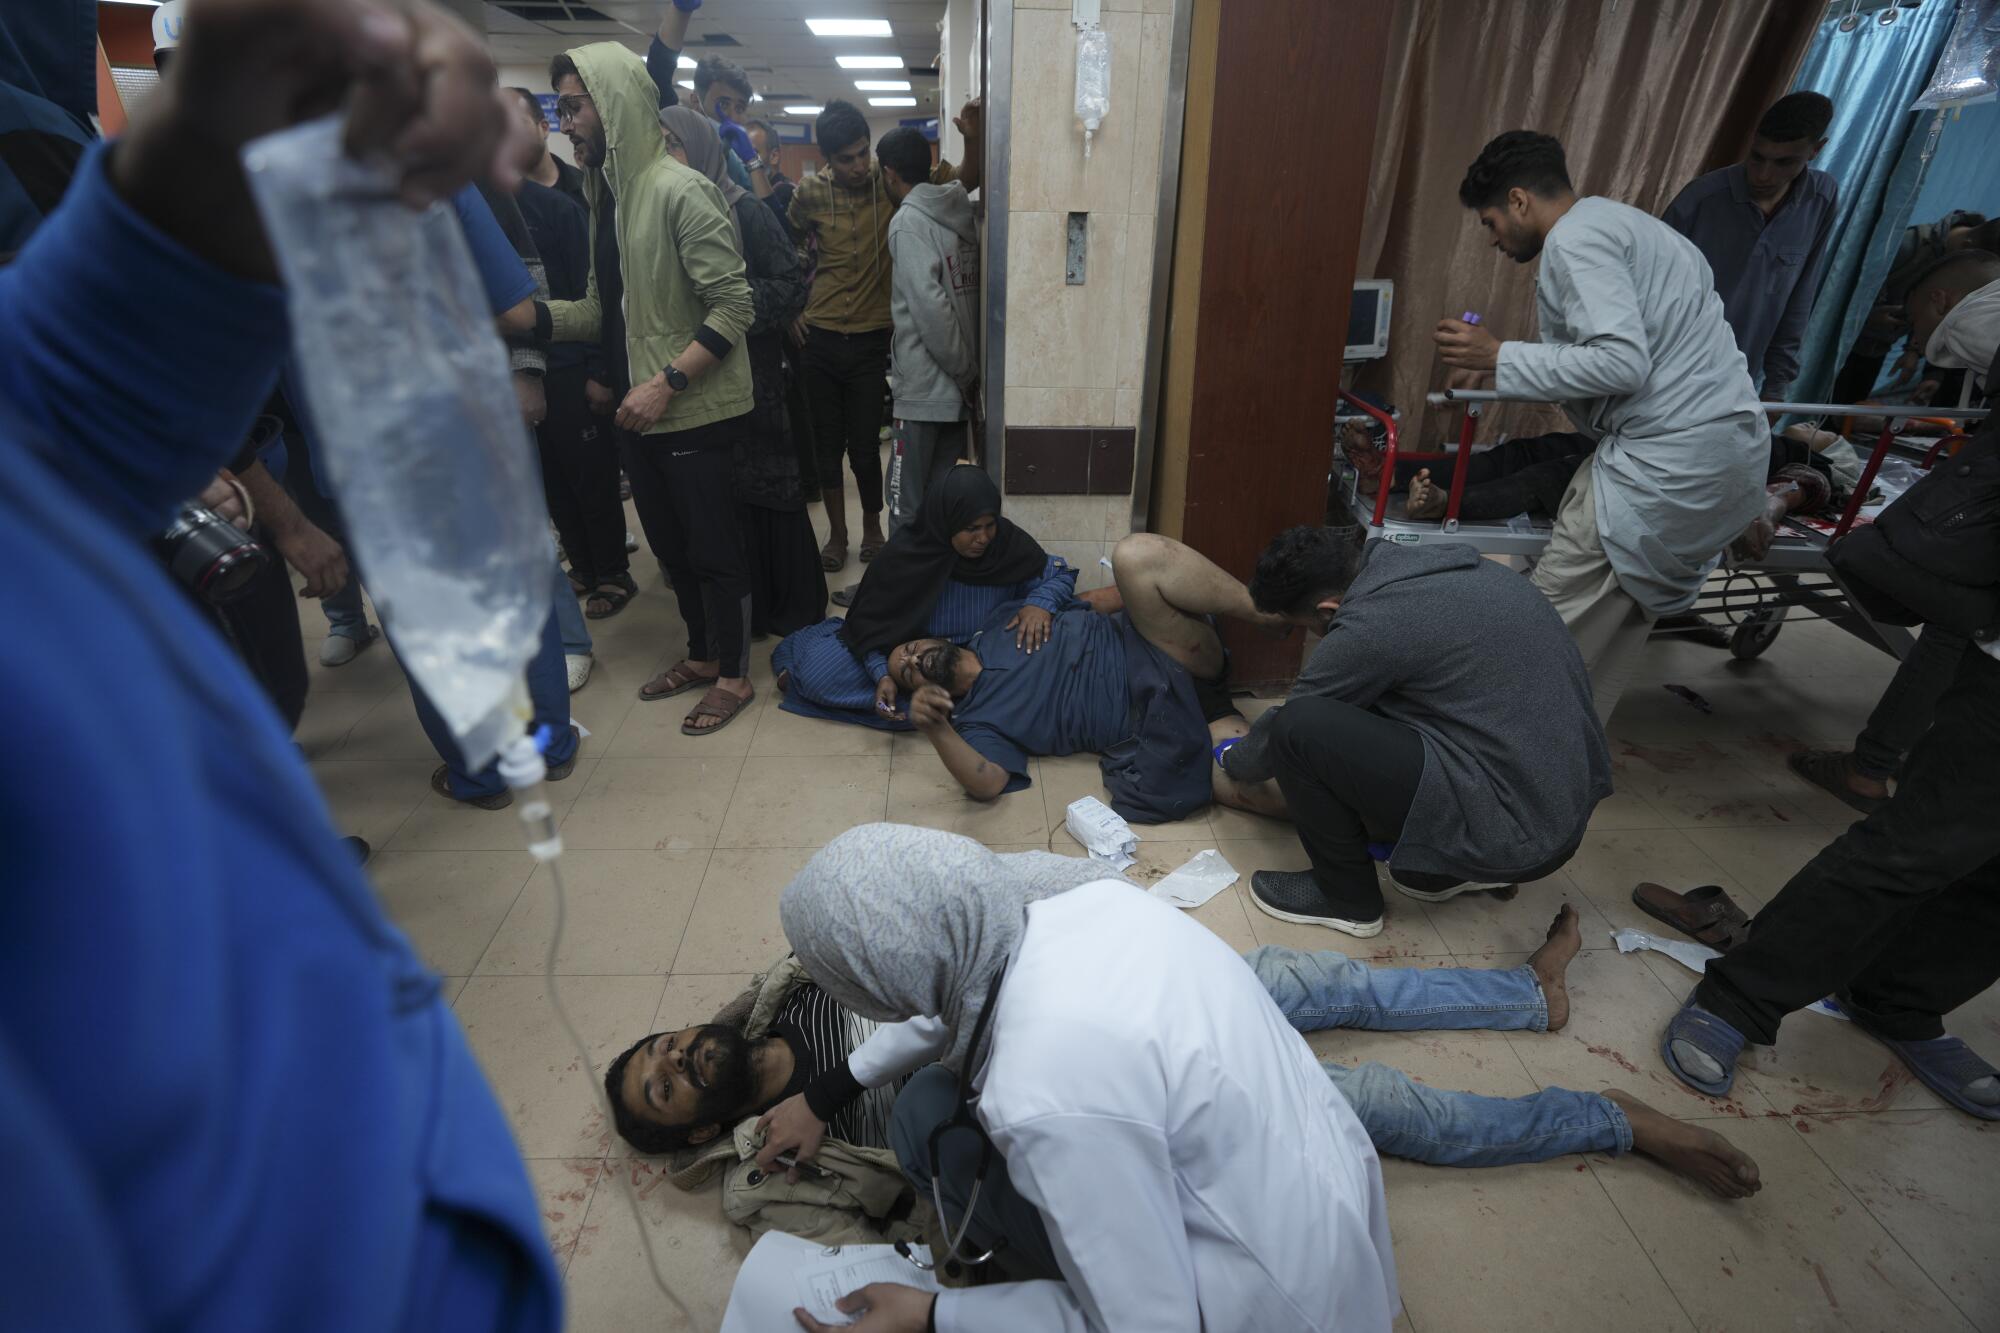 Wounded Gazans sit and lie on the floor at a crowded hospital